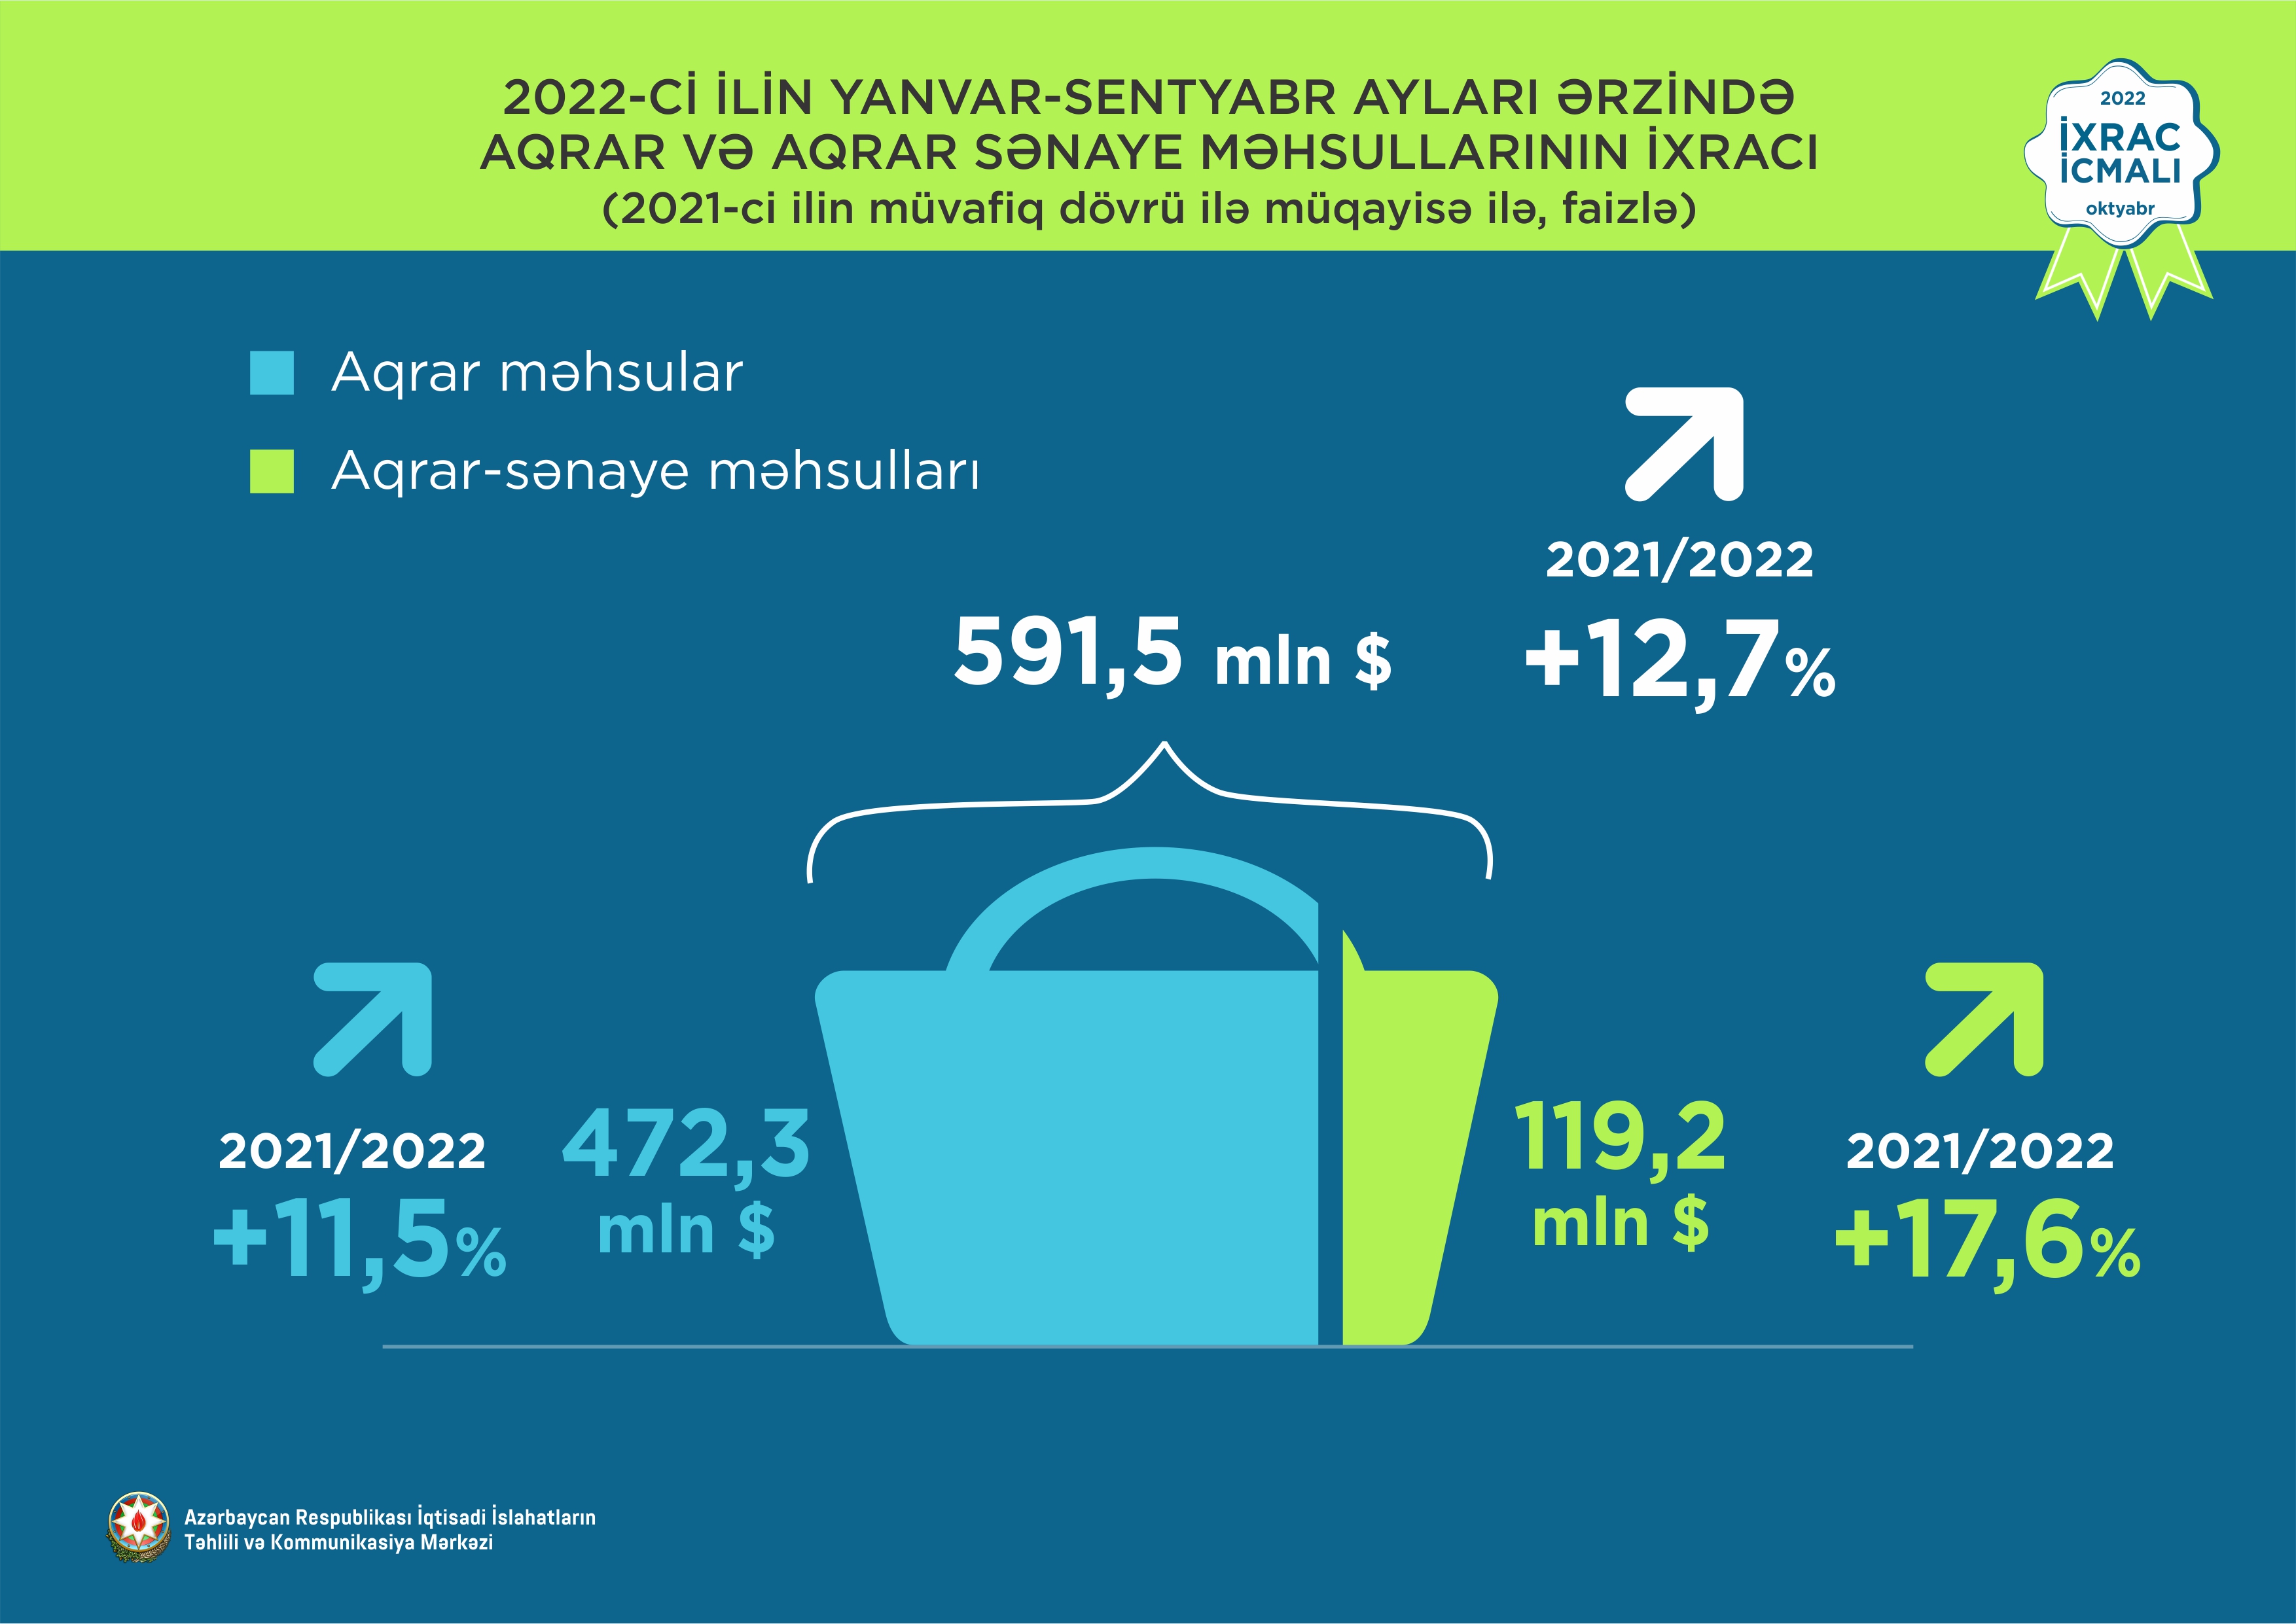 In Azerbaijan, exports in the non-oil sector increased by 17% in 9 months